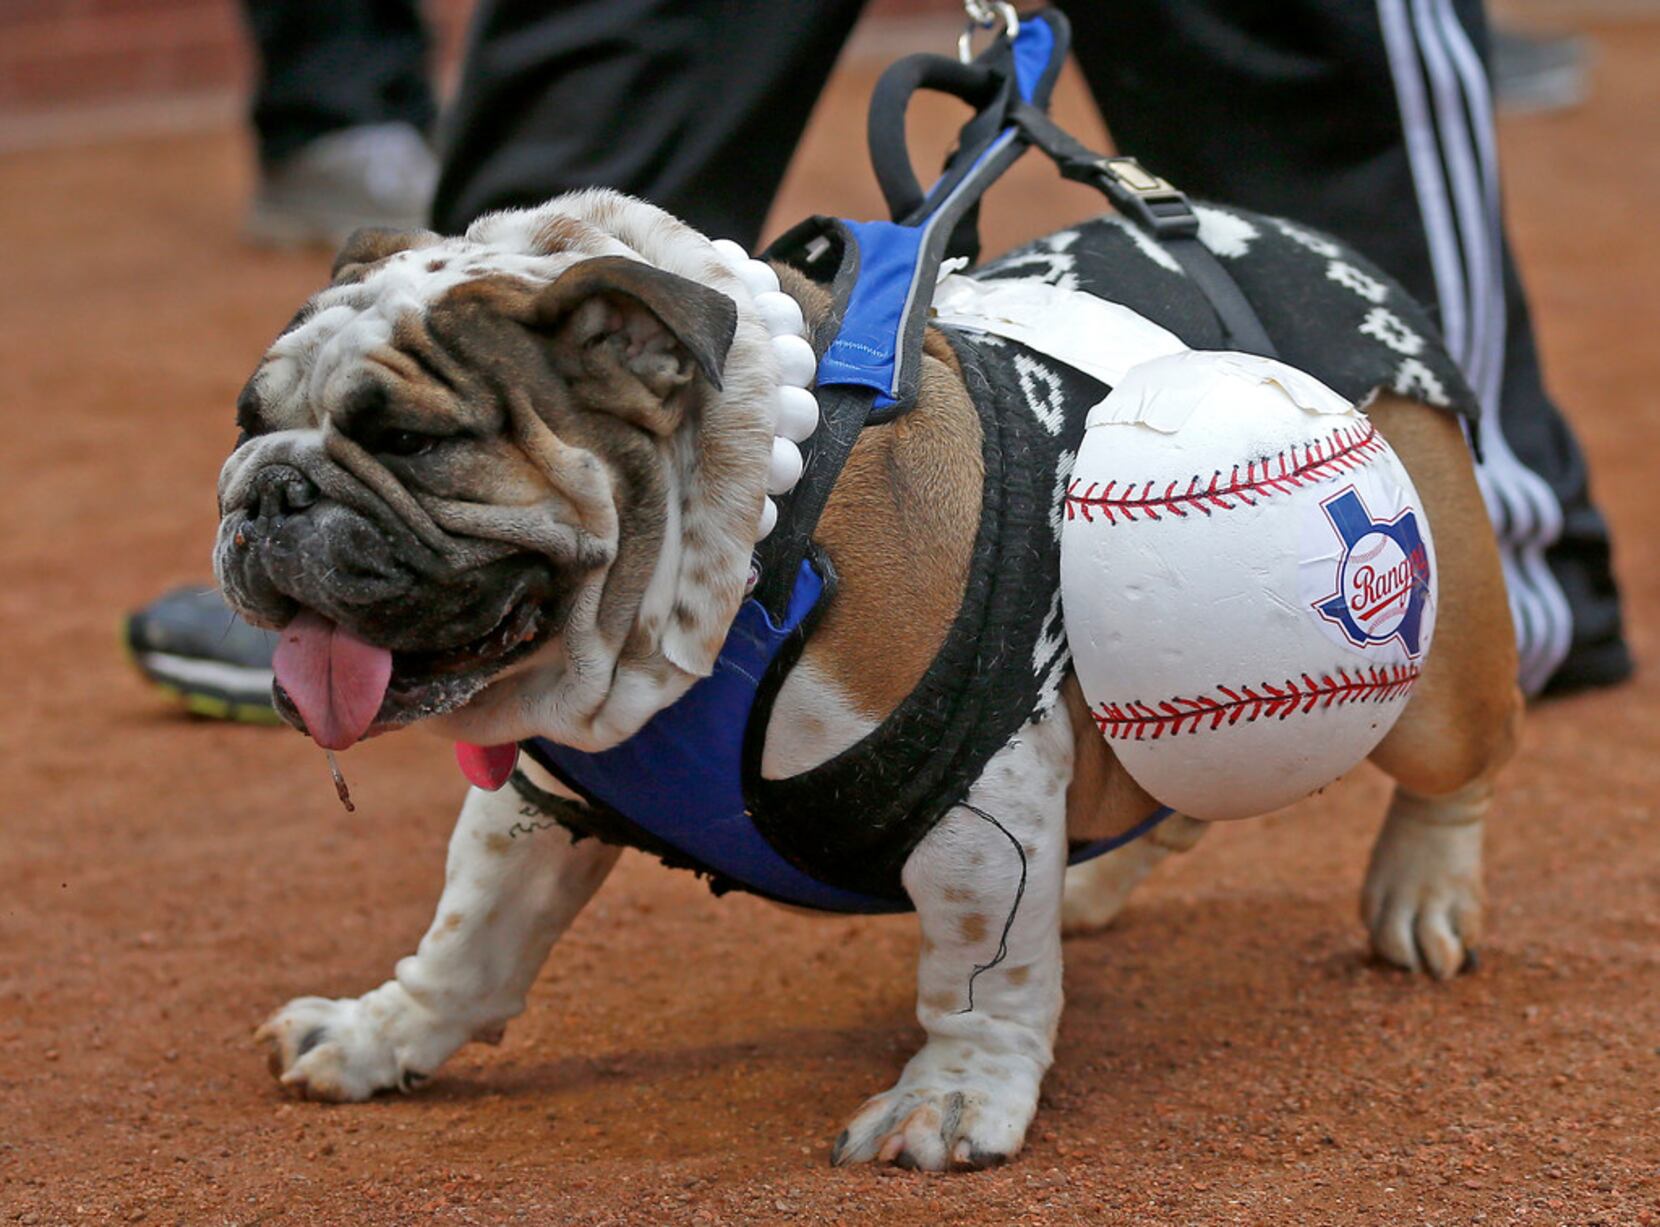 Bark in the Park: Enjoy a Texas Tech Baseball Game with Your Dog